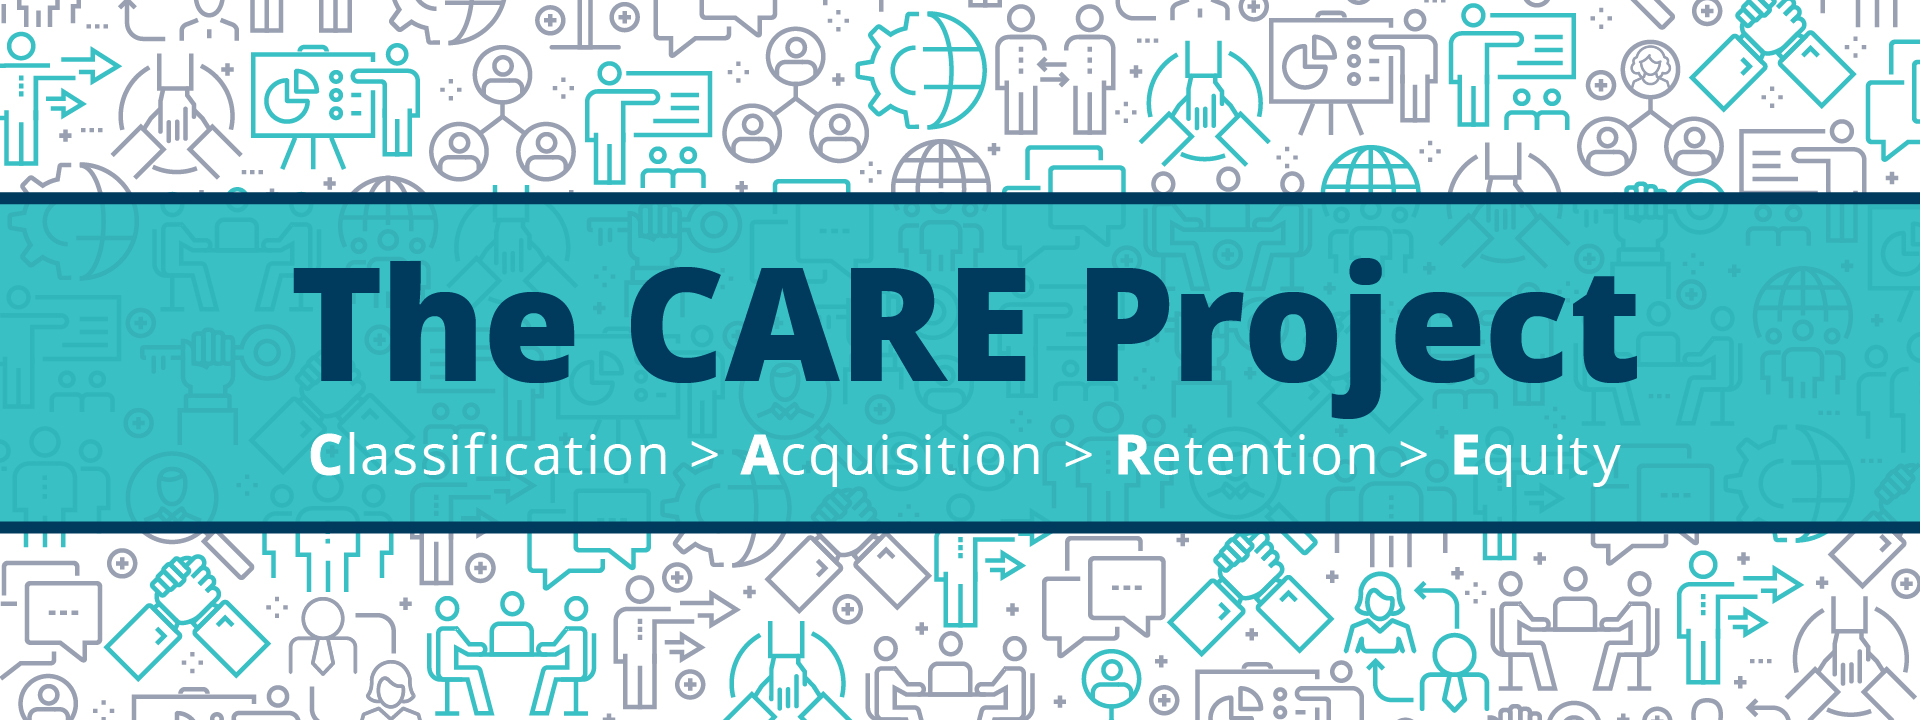 The CARE Project